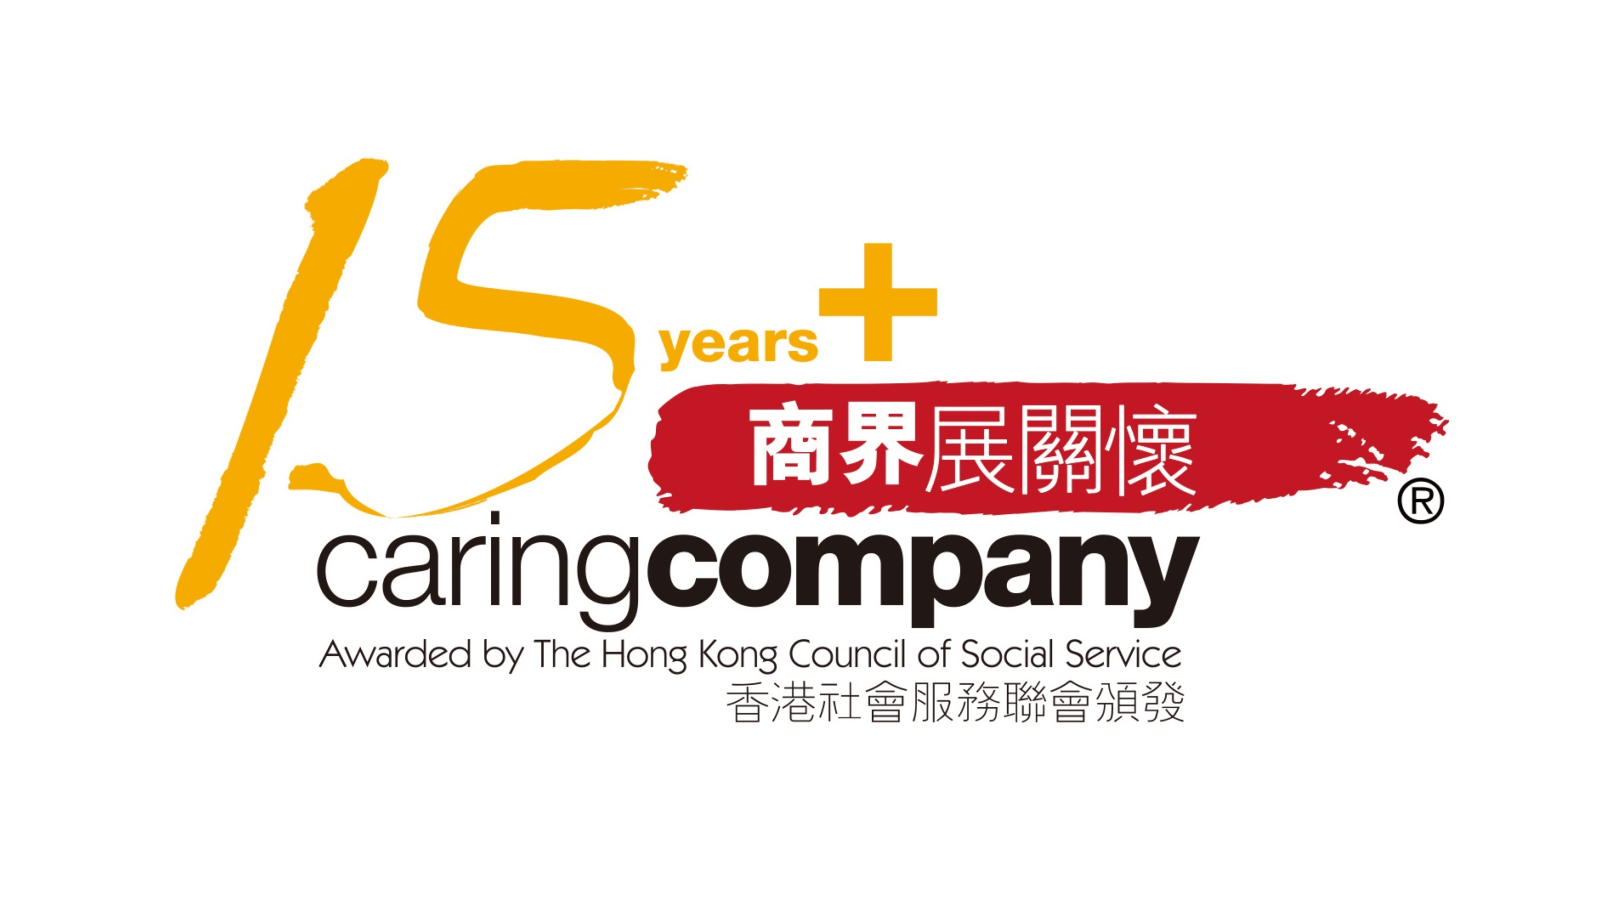 FTLife awarded Caring Company Logo for 18 consecutive years